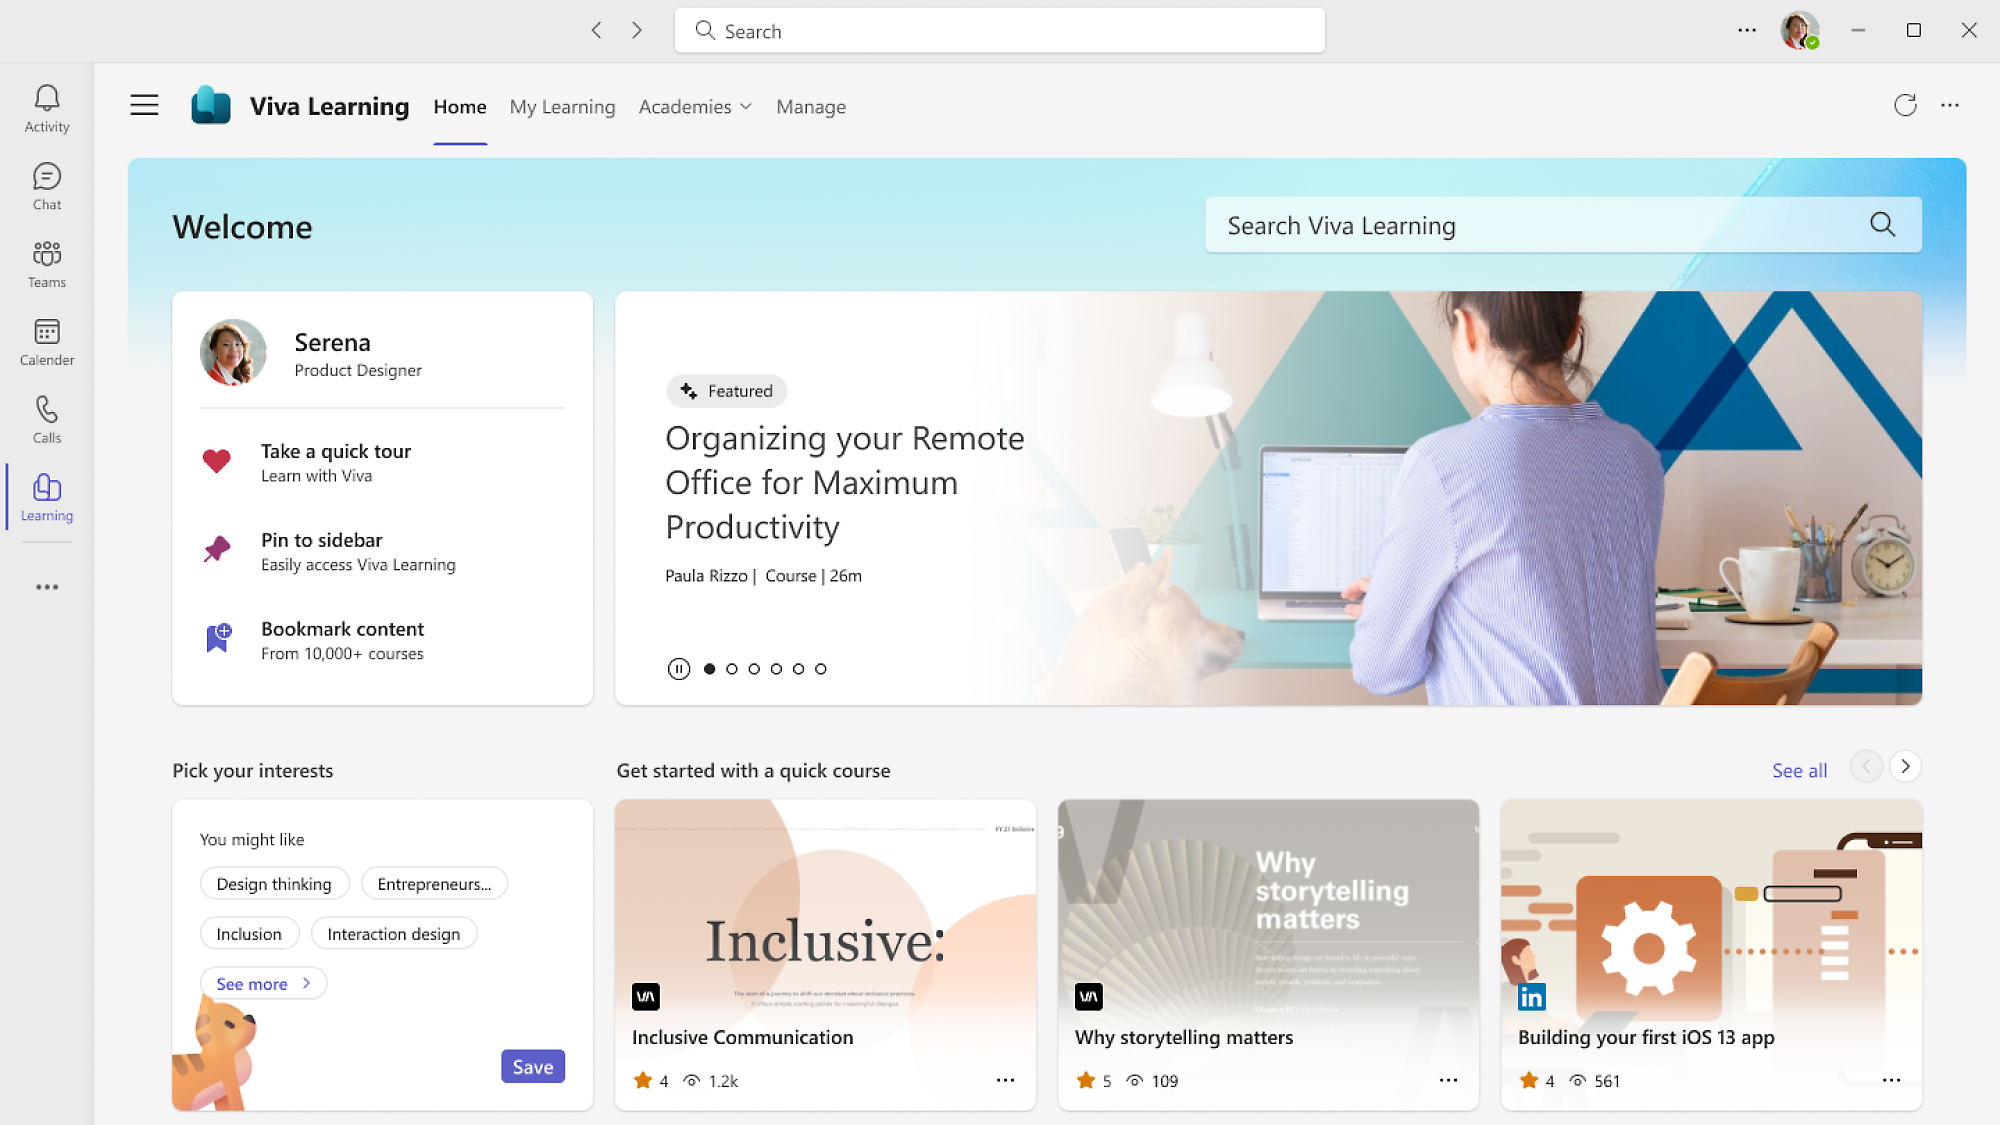 Viva Learning platform: Search, courses, management, featured content, interests, productivity, and recommendations